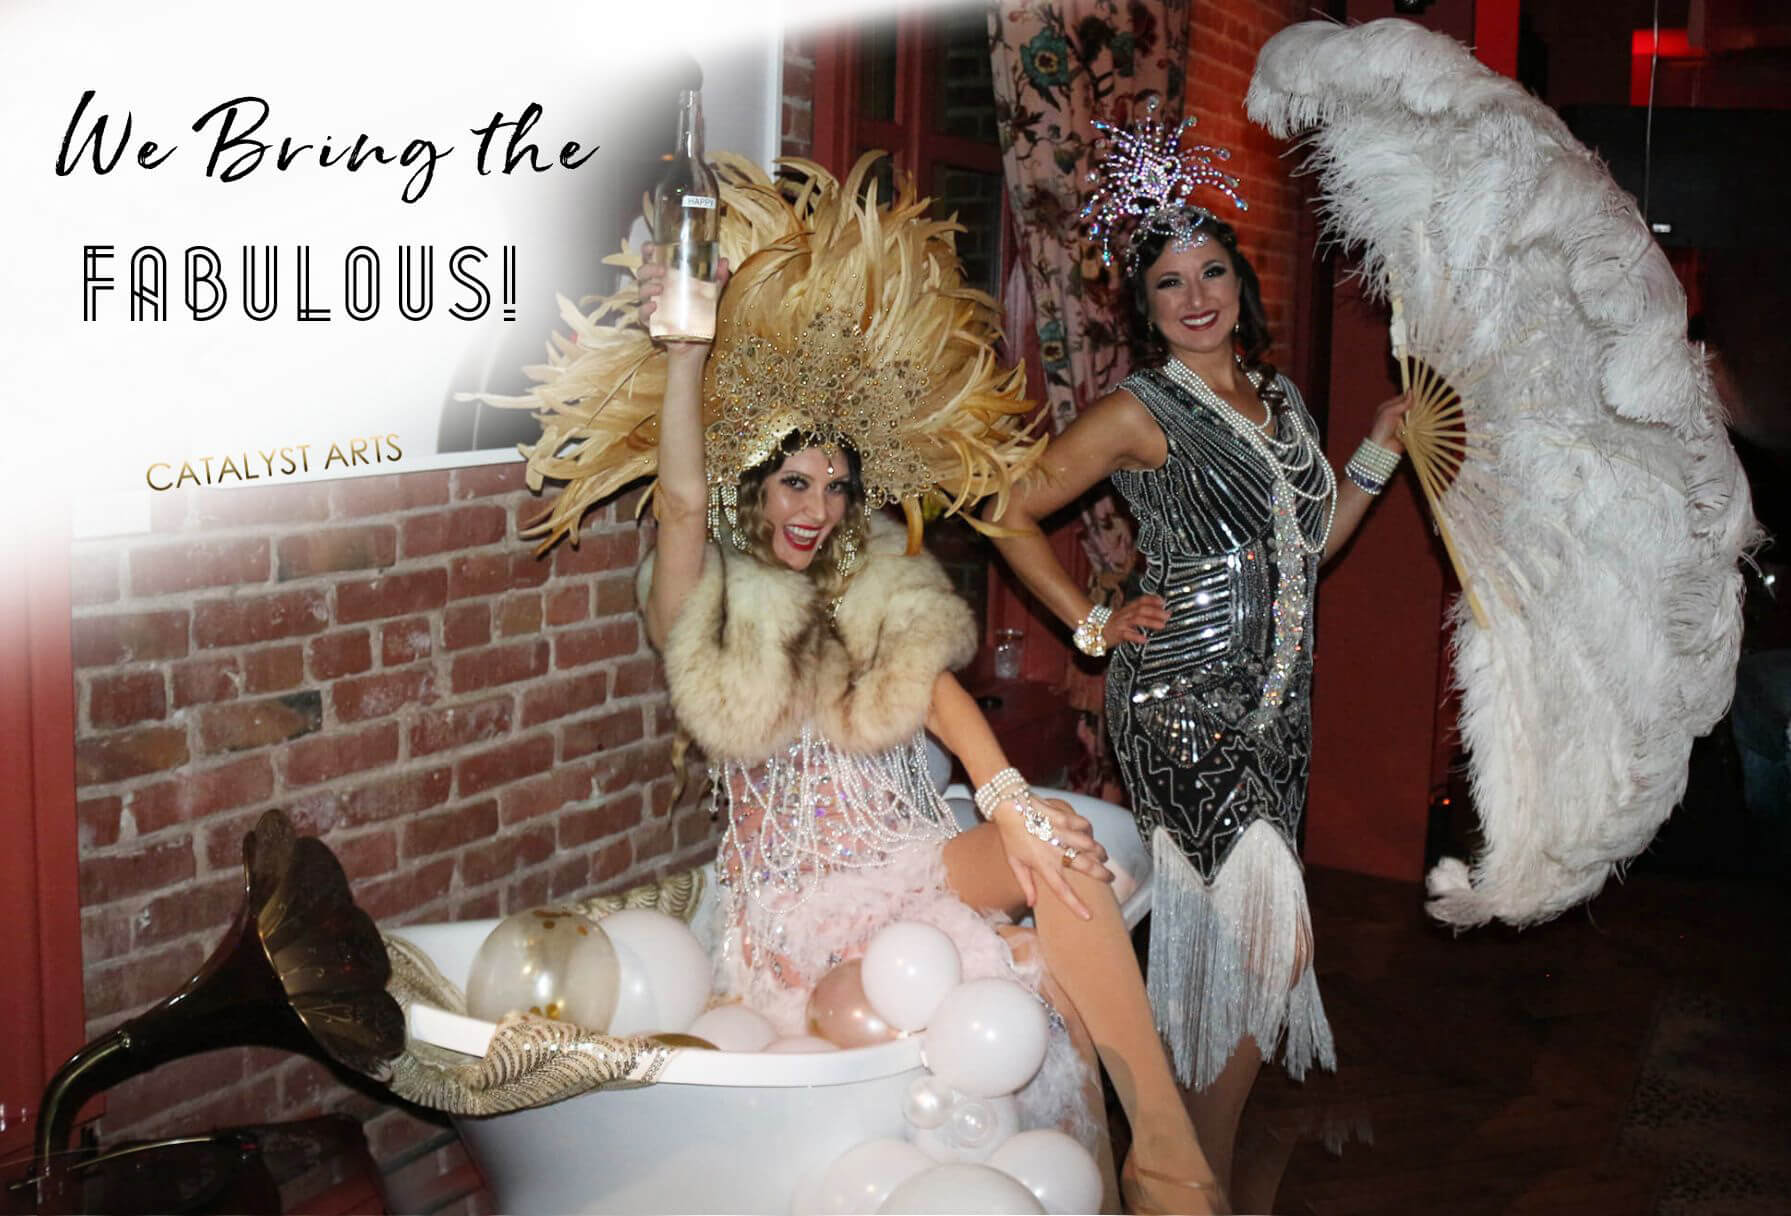 We bring the Fabulous to Gatsby & 20's themed events in California + Bathtub specialty prop vignette for events 